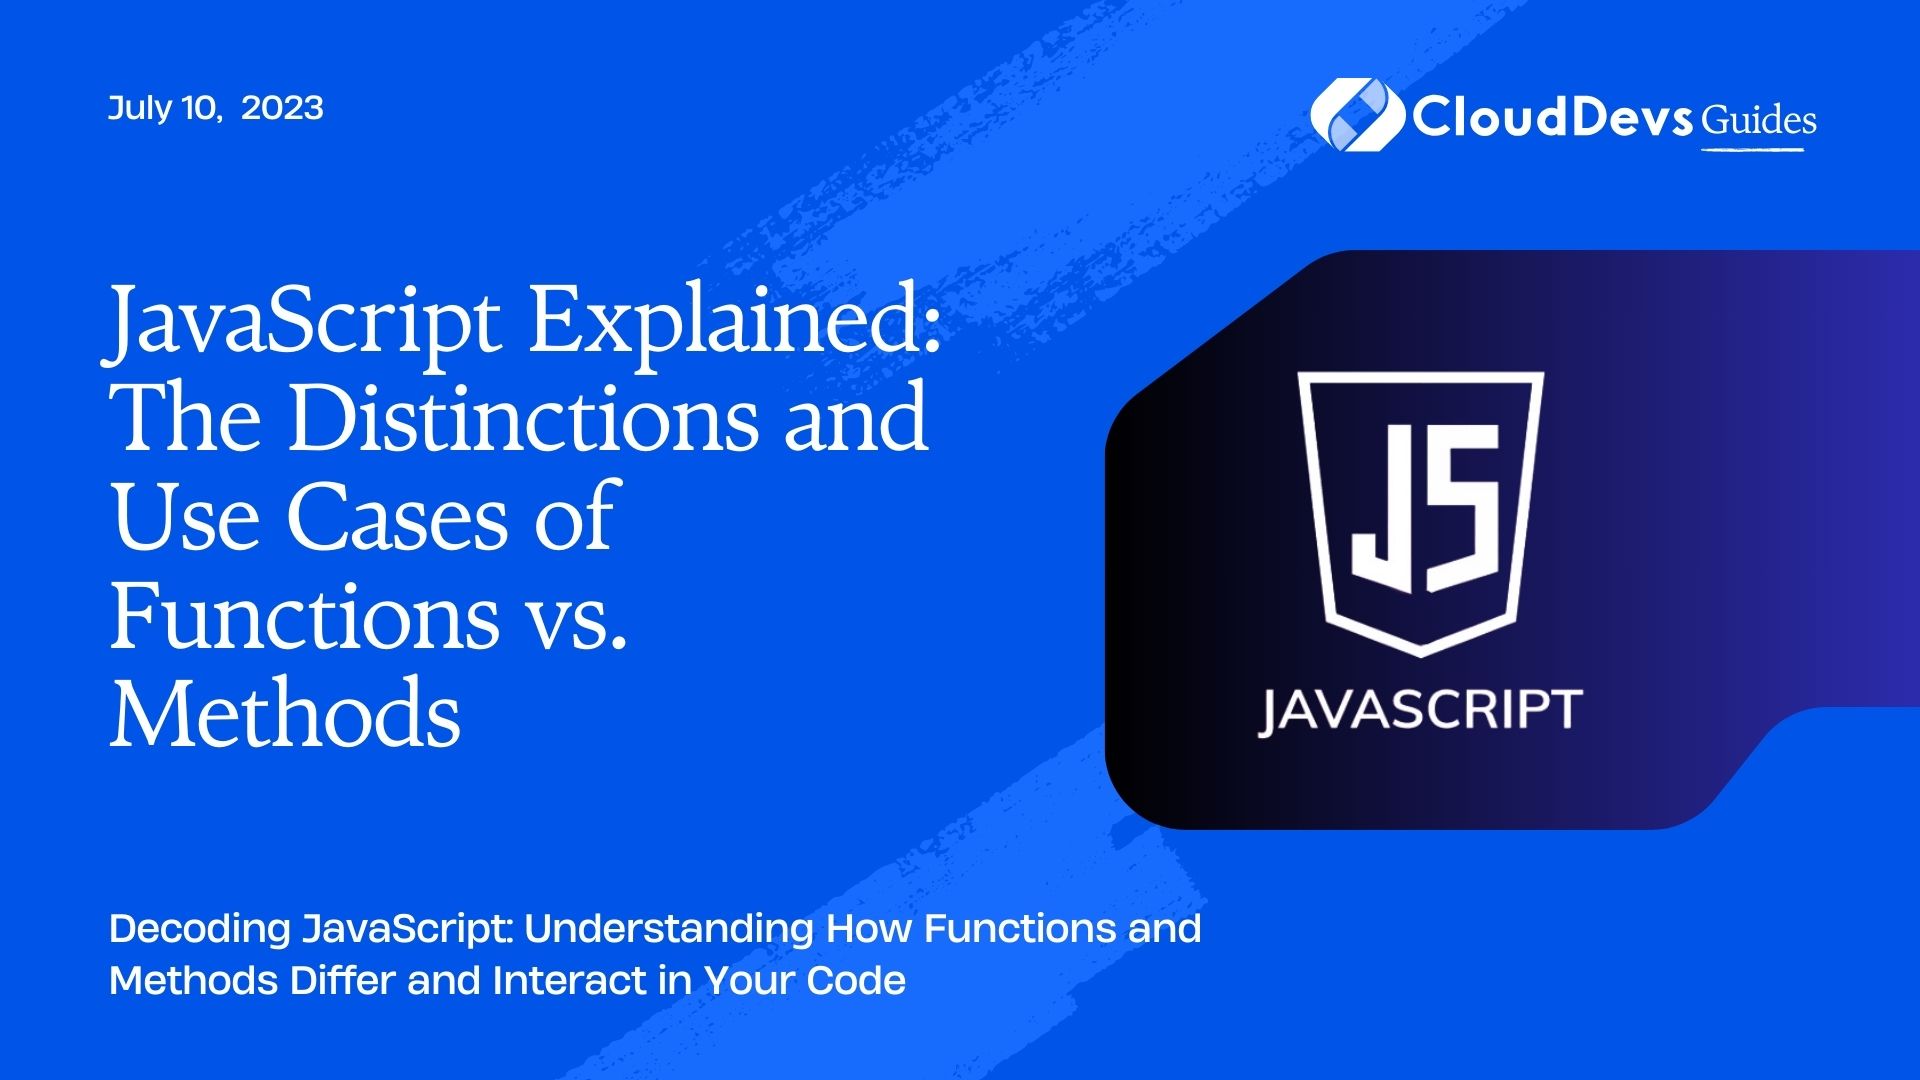 JavaScript Explained: The Distinctions and Use Cases of Functions vs. Methods